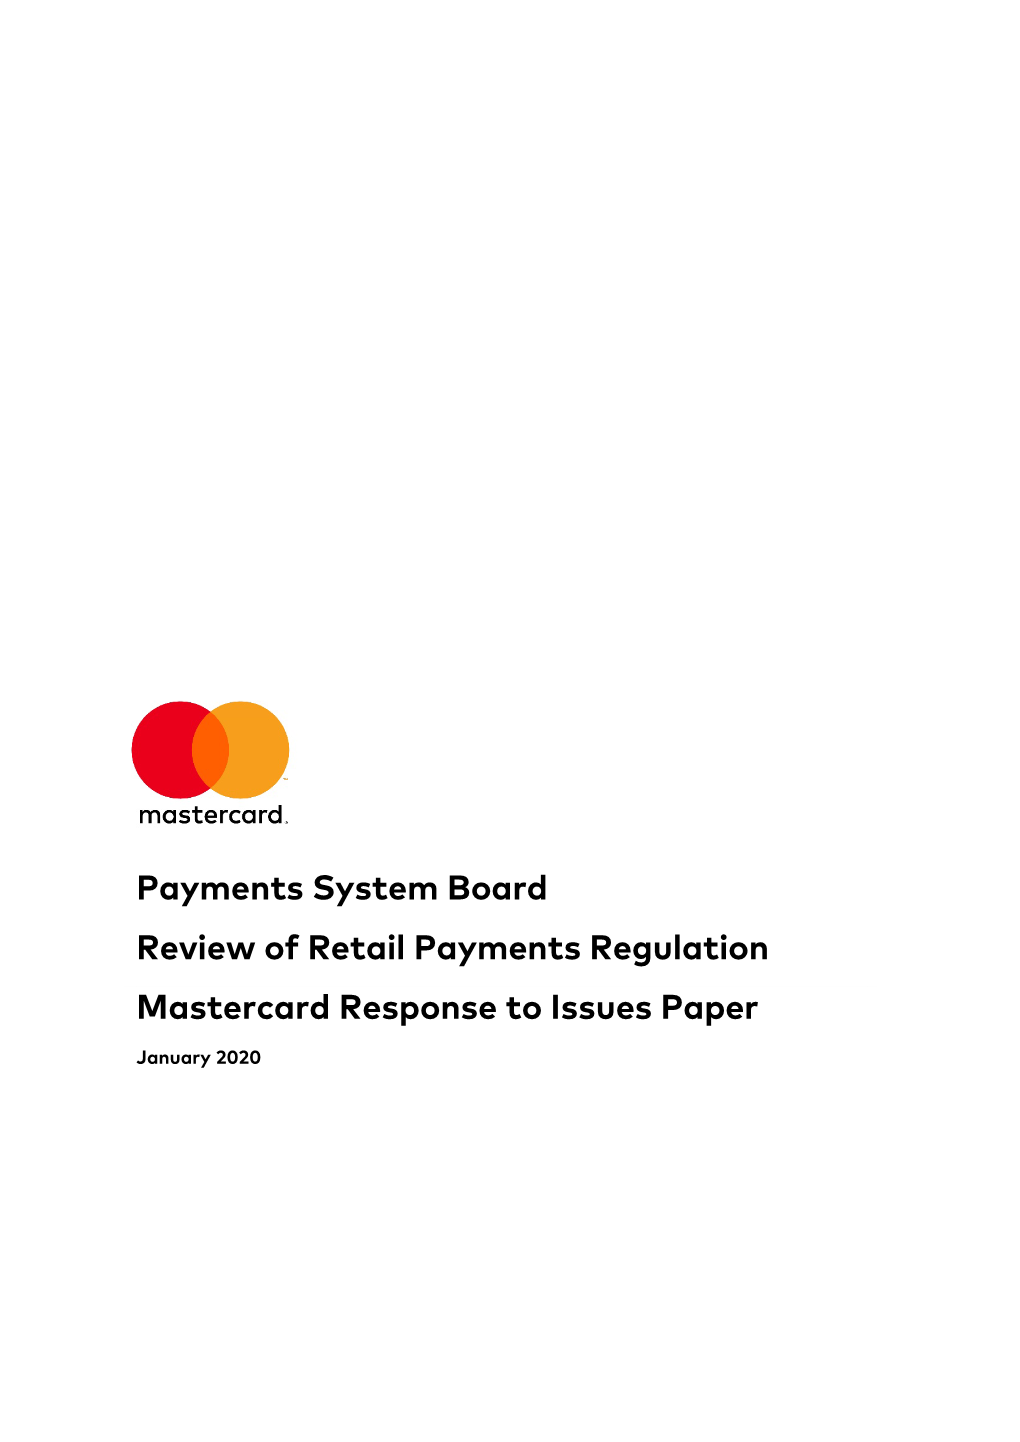 Mastercard Response to Issues Paper